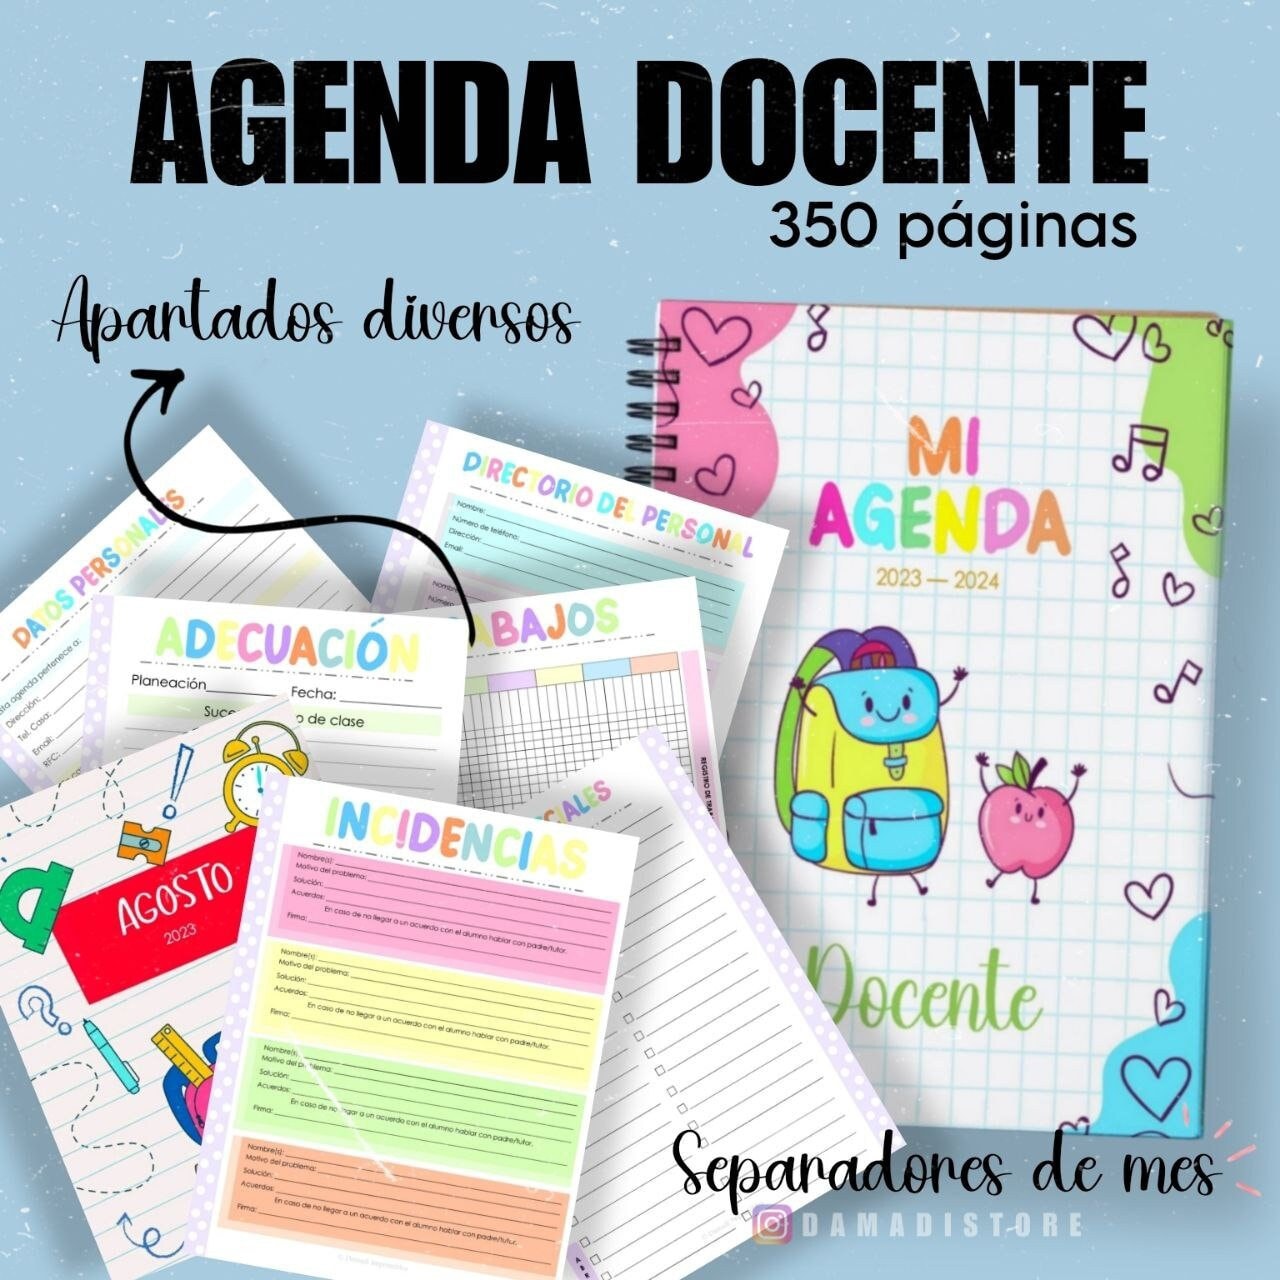 L'agenda 2023-2024 : The Complete Planner – Rosie Papeterie